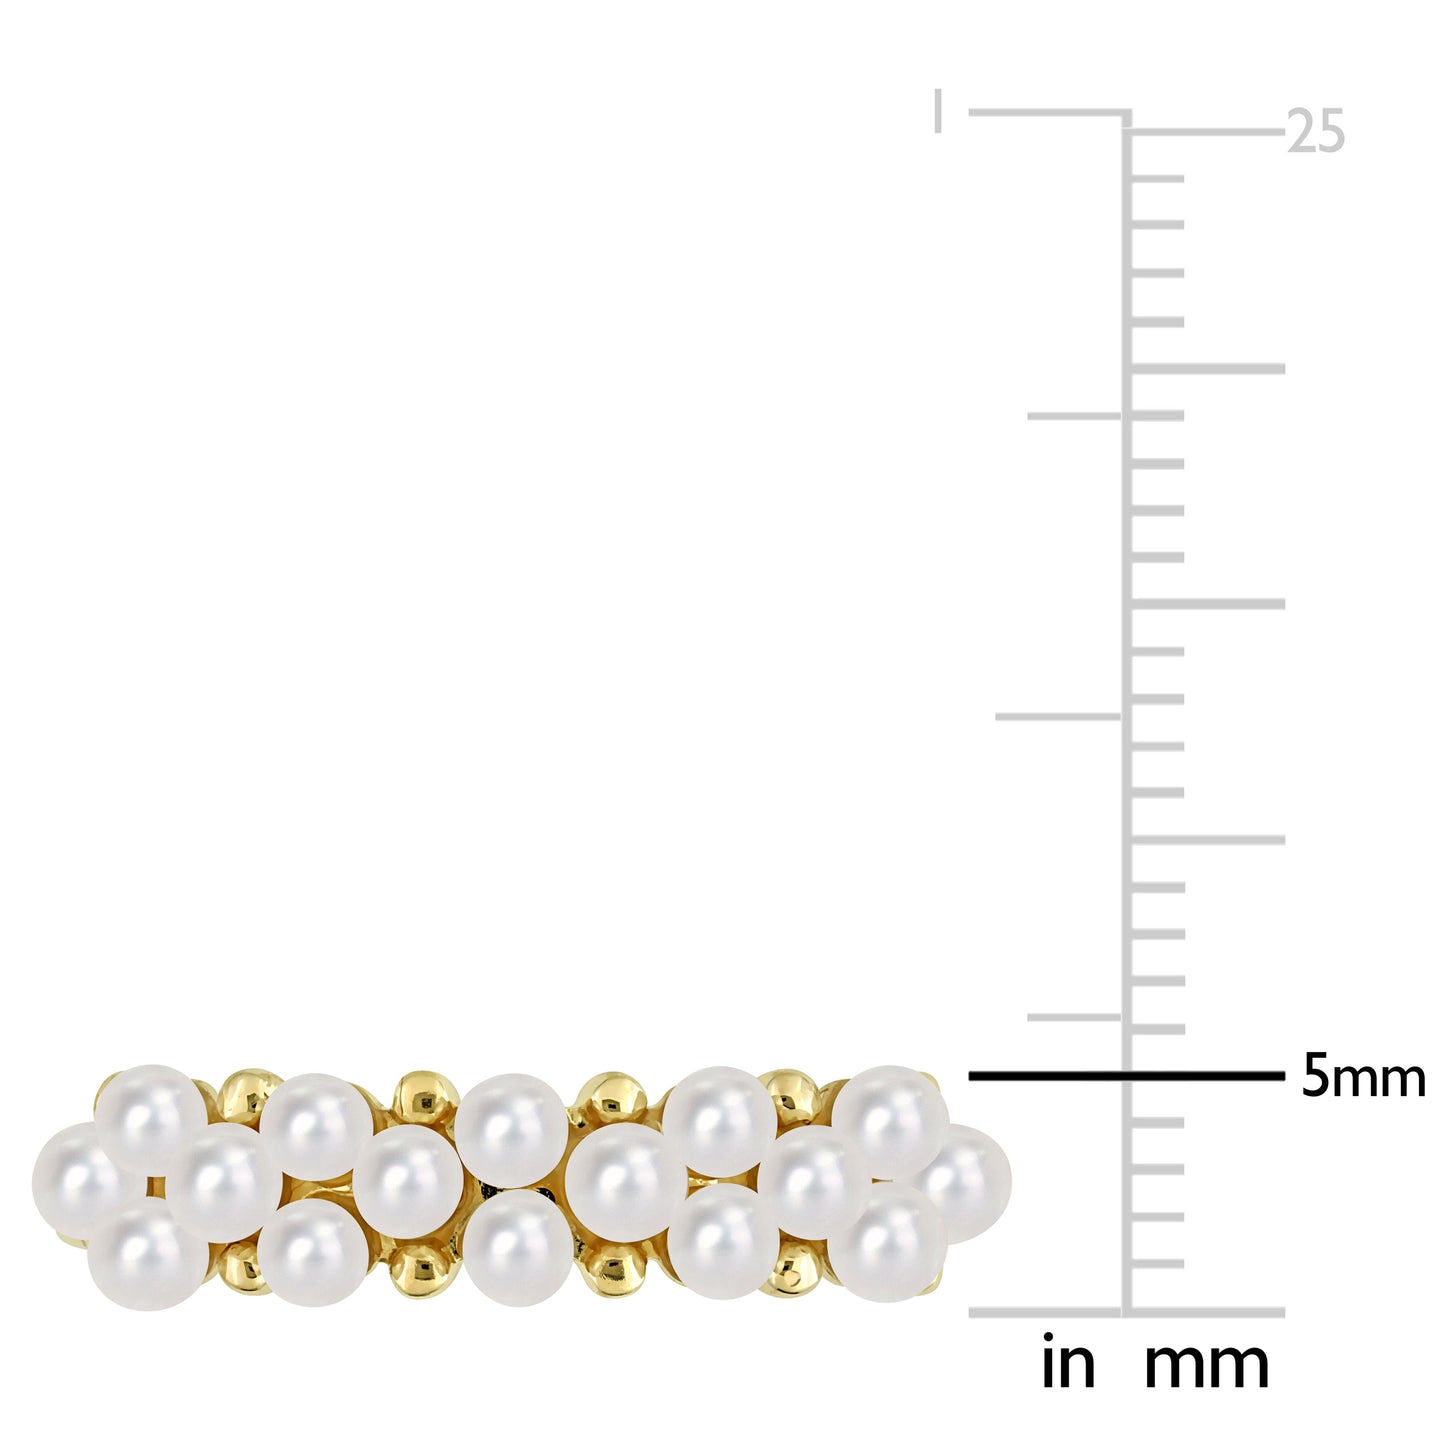 2-2.5 mm White cultured freshwater pearl semi-eternity ring in 14k yellow gold